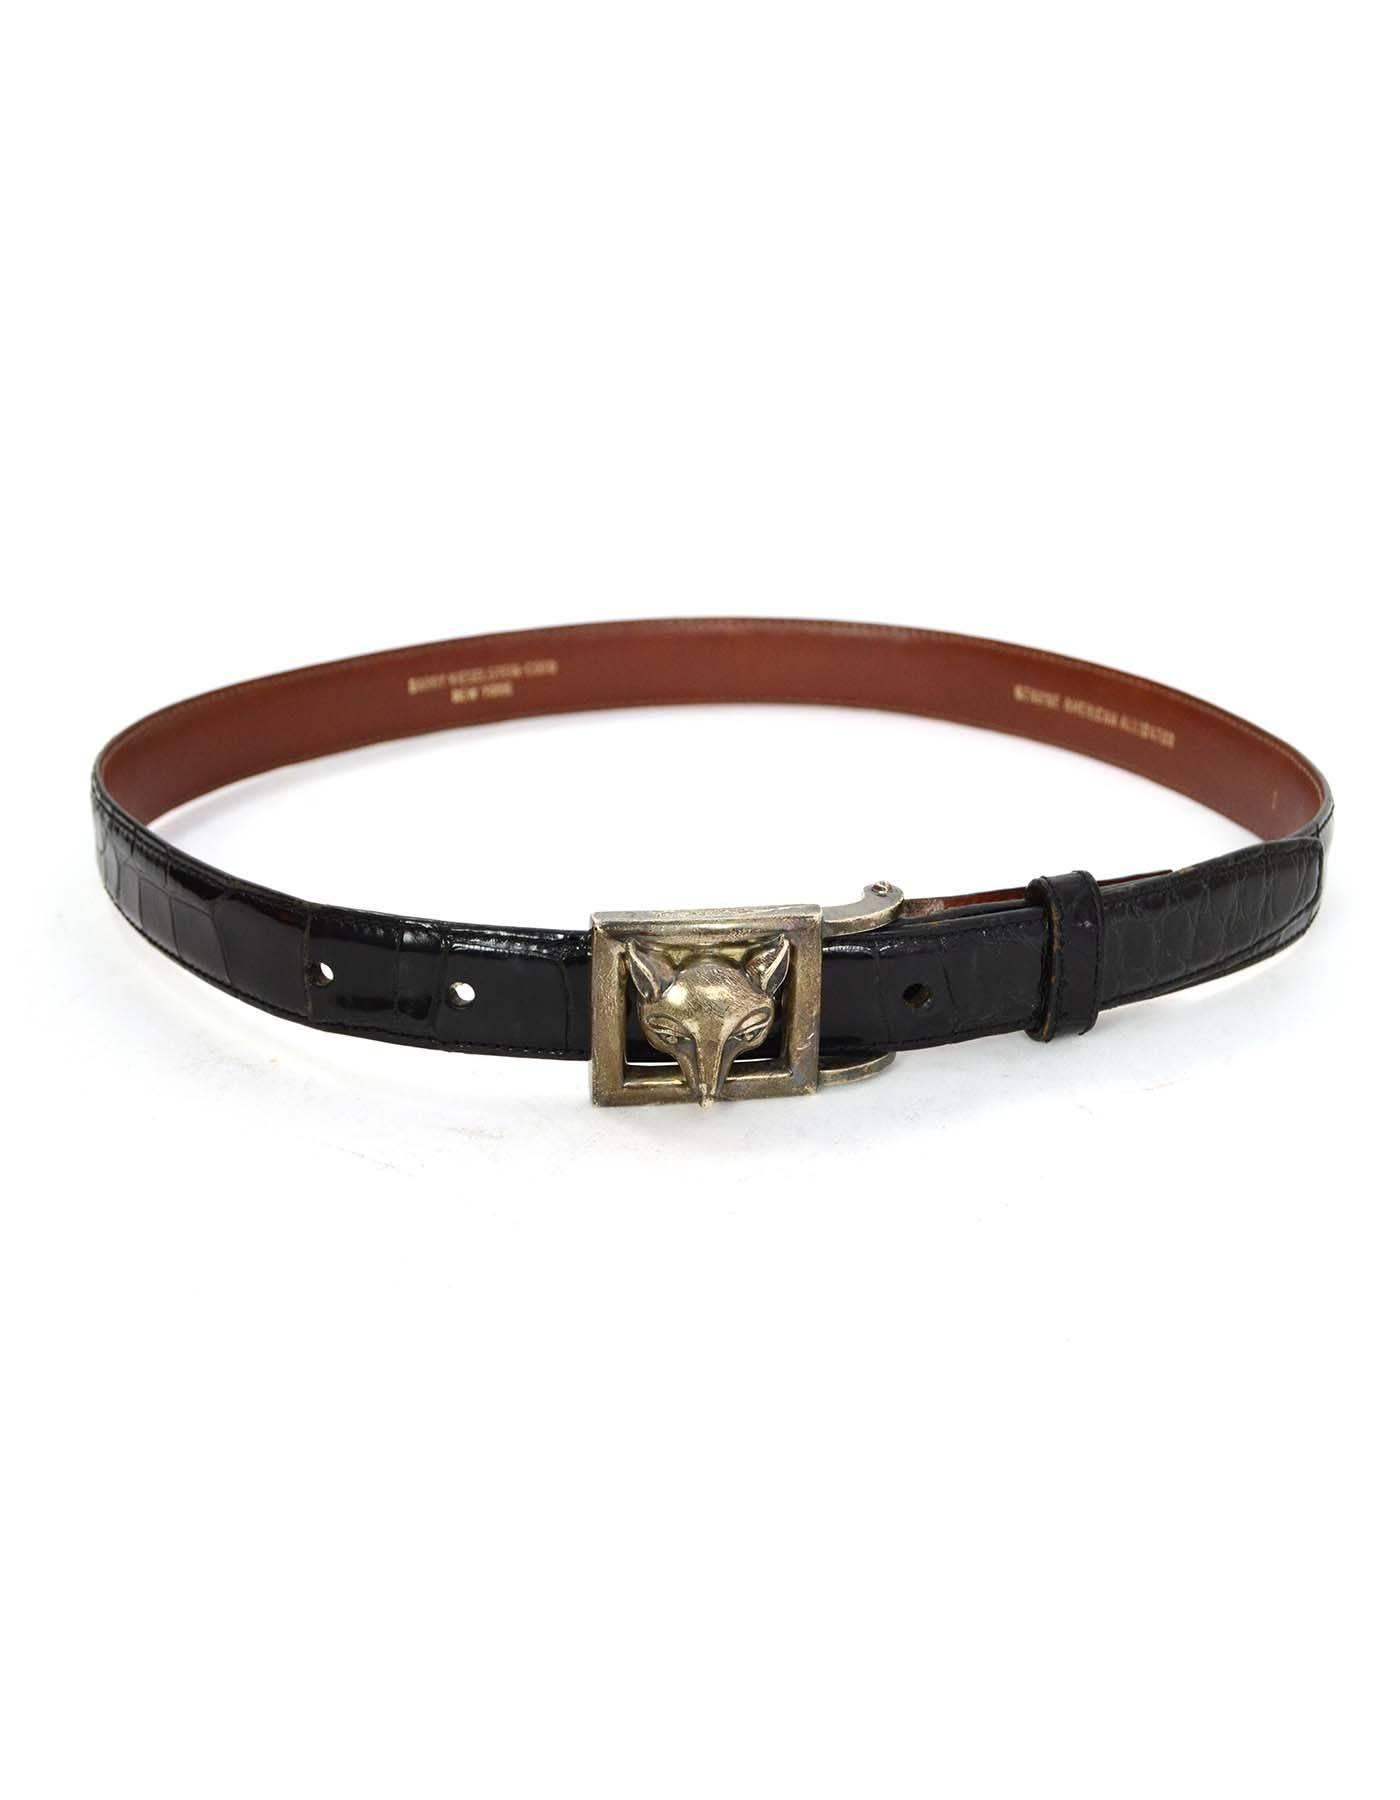 Kieselstein-Cord Alligator Skin Belt 
Features sterling wolf head belt buckle
Year of Production: 1996
Color: Black, brown and silver
Hardware: Sterling silver
Materials: Alligator skin, leather and sterling silver
Closure/Opening: Stud and